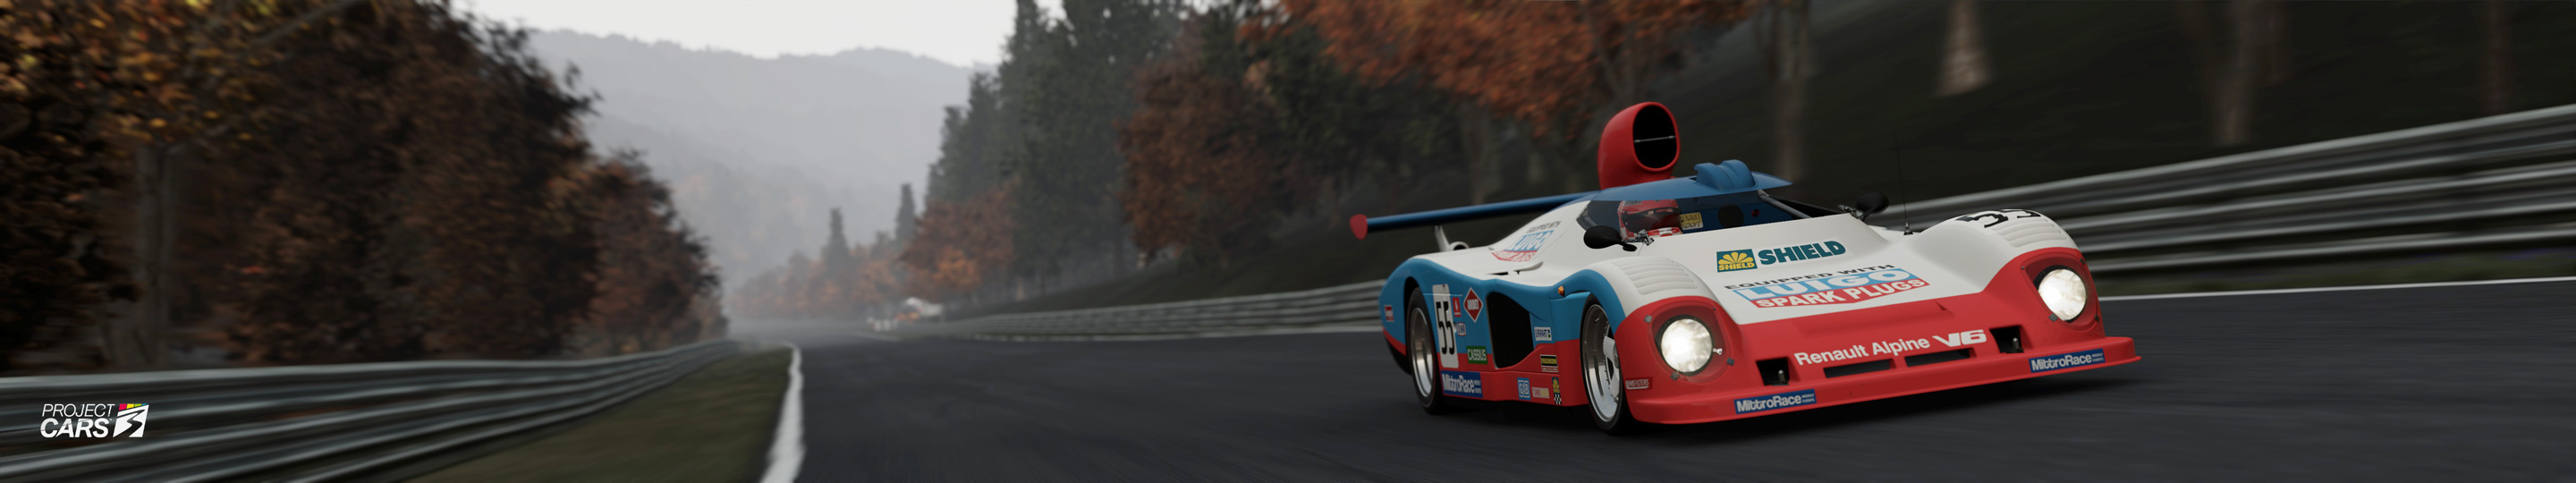 3 PROJECT CARS 3 ALPINE A442B at NORDSCHLEIFE copy.jpg